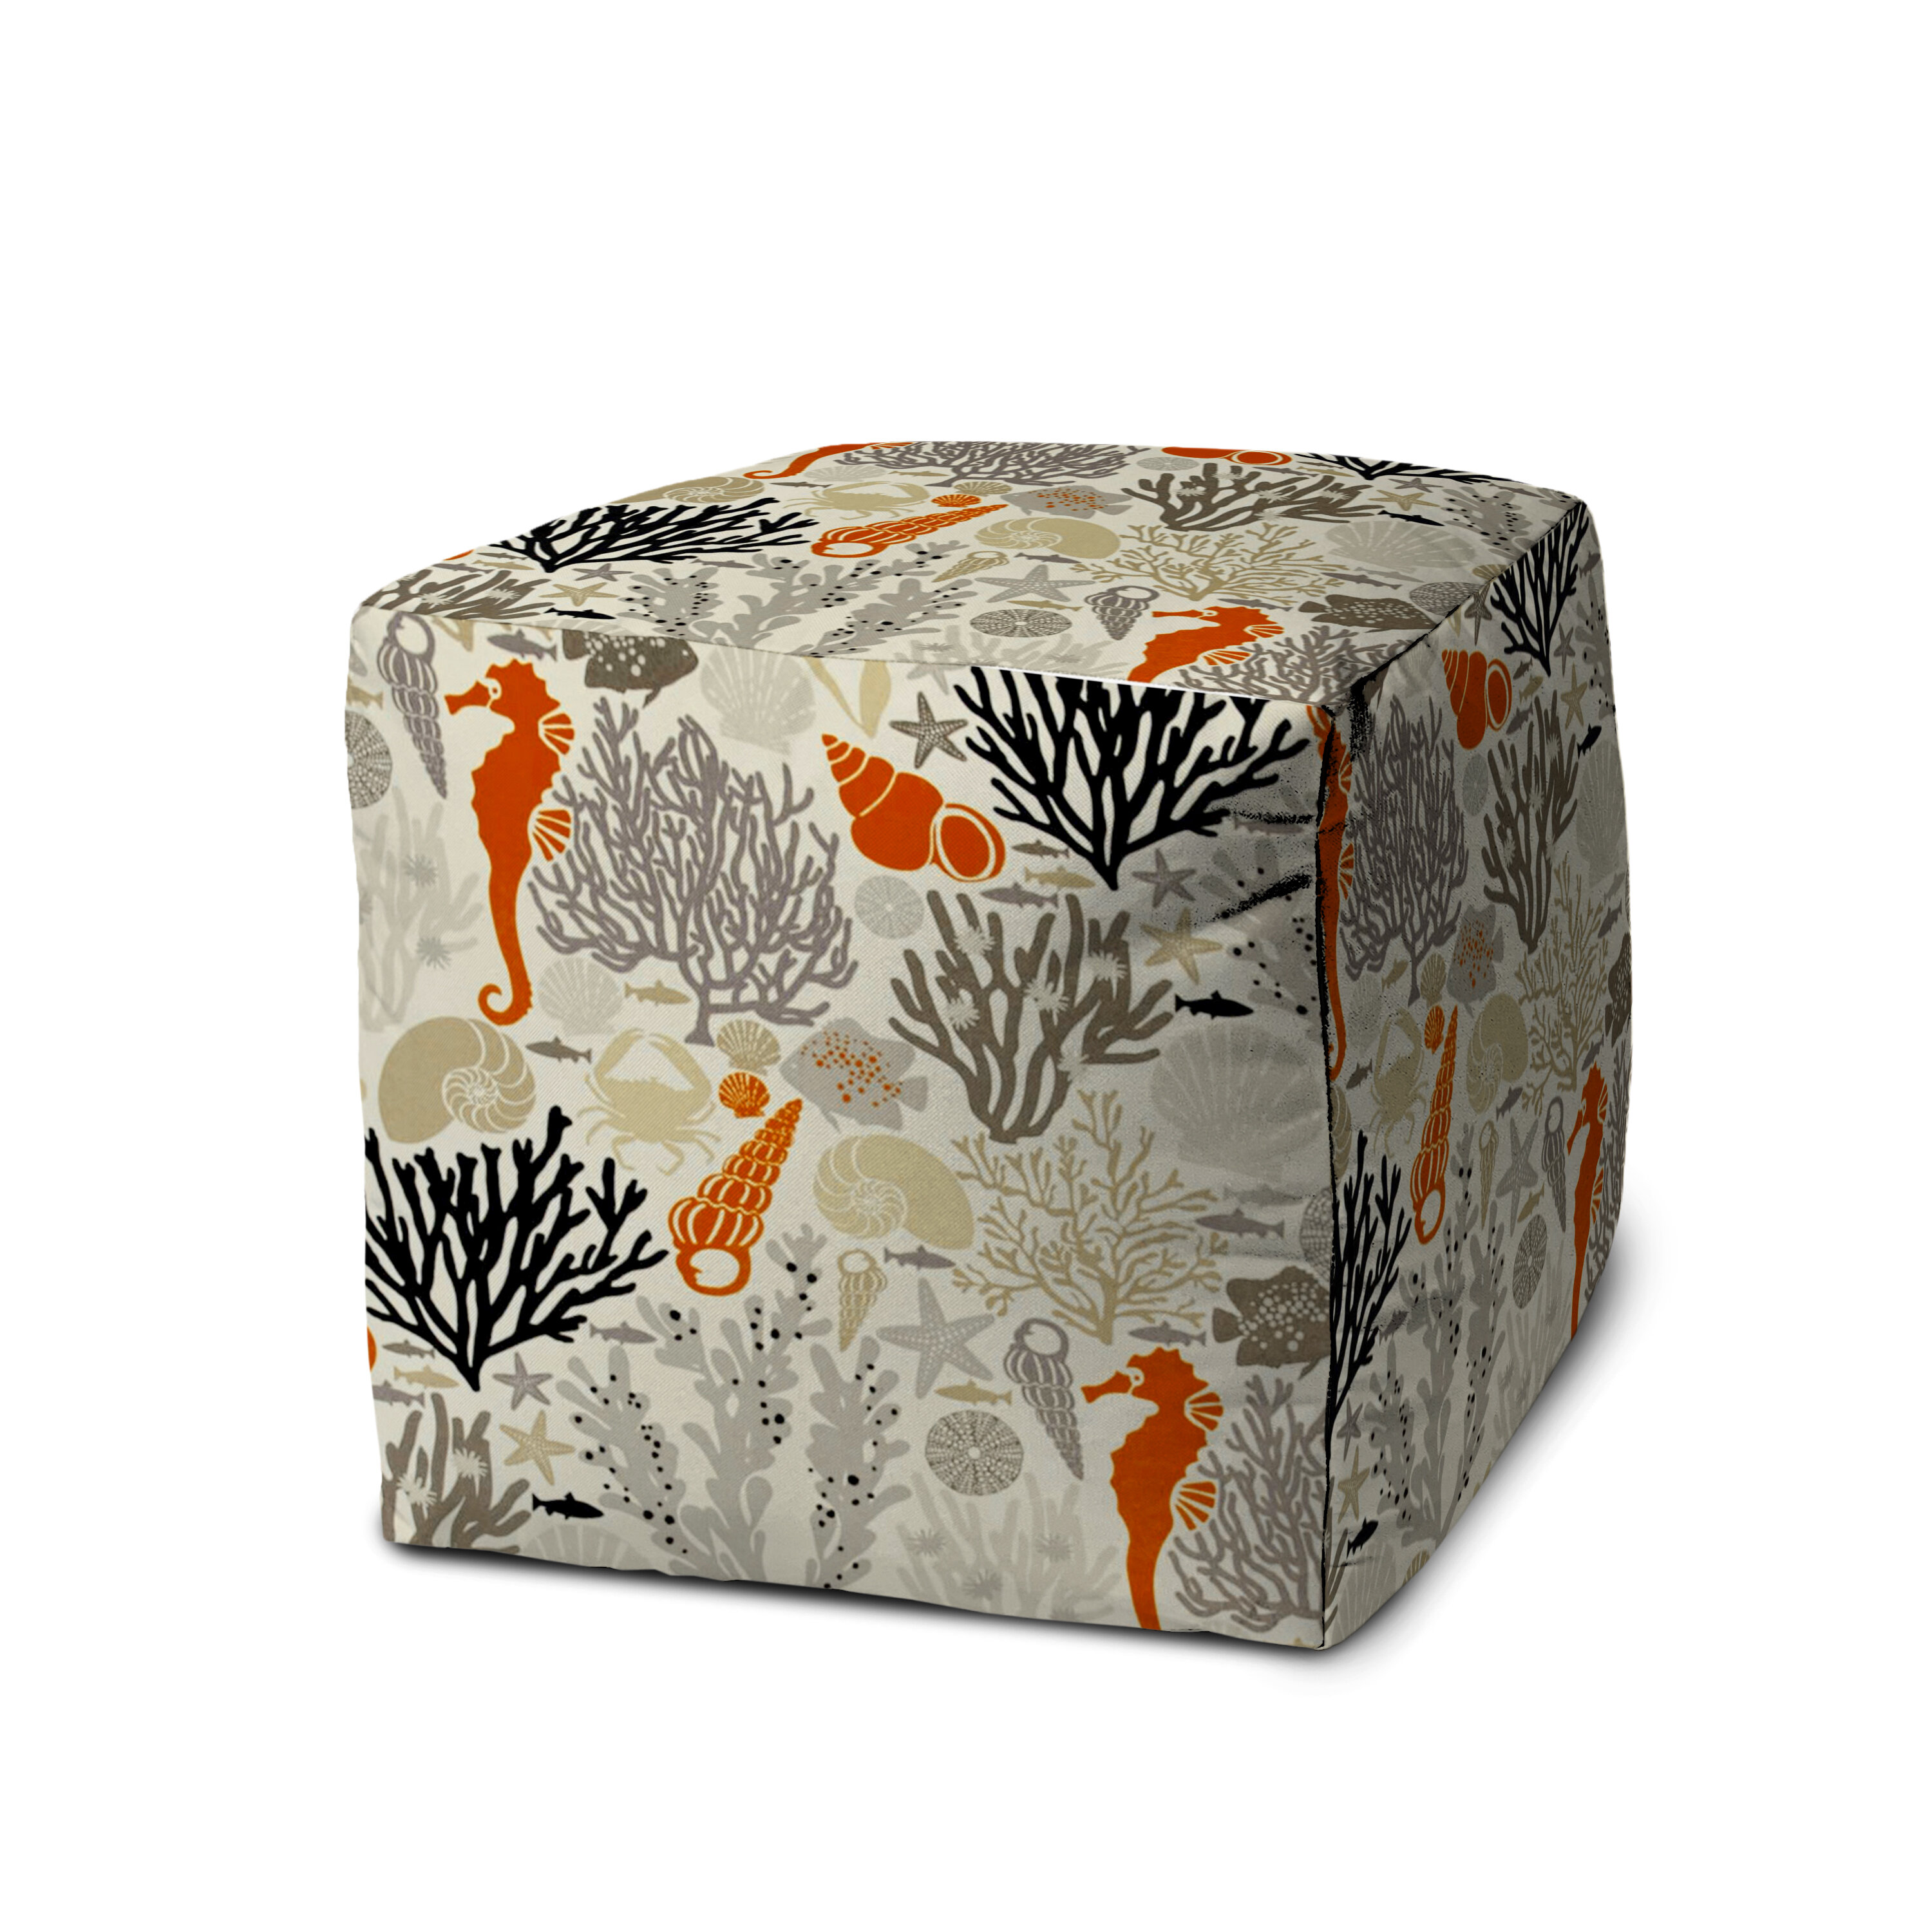 Taupe Indoor/Outdoor Pouf - Zipper Cover with Luxury Polyfil Stuffing - 17 x 17 x 17 Cube Red Barrel Studio